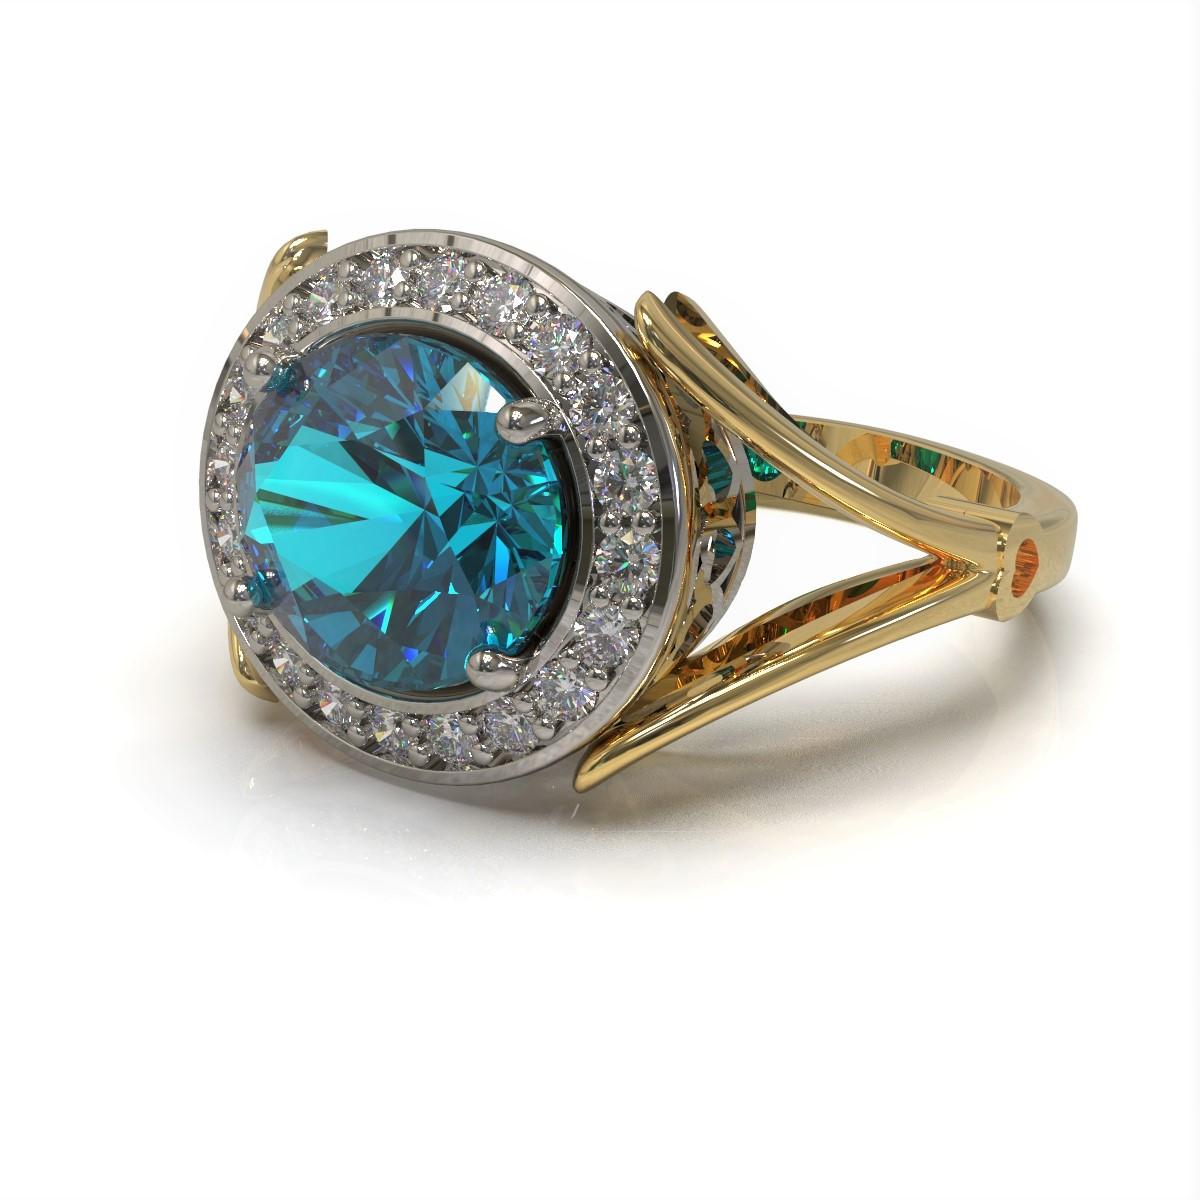 Kian Design 2.60 Carat Apatite and Diamond Cocktail Ring in Platinum In New Condition For Sale In South Perth, AU